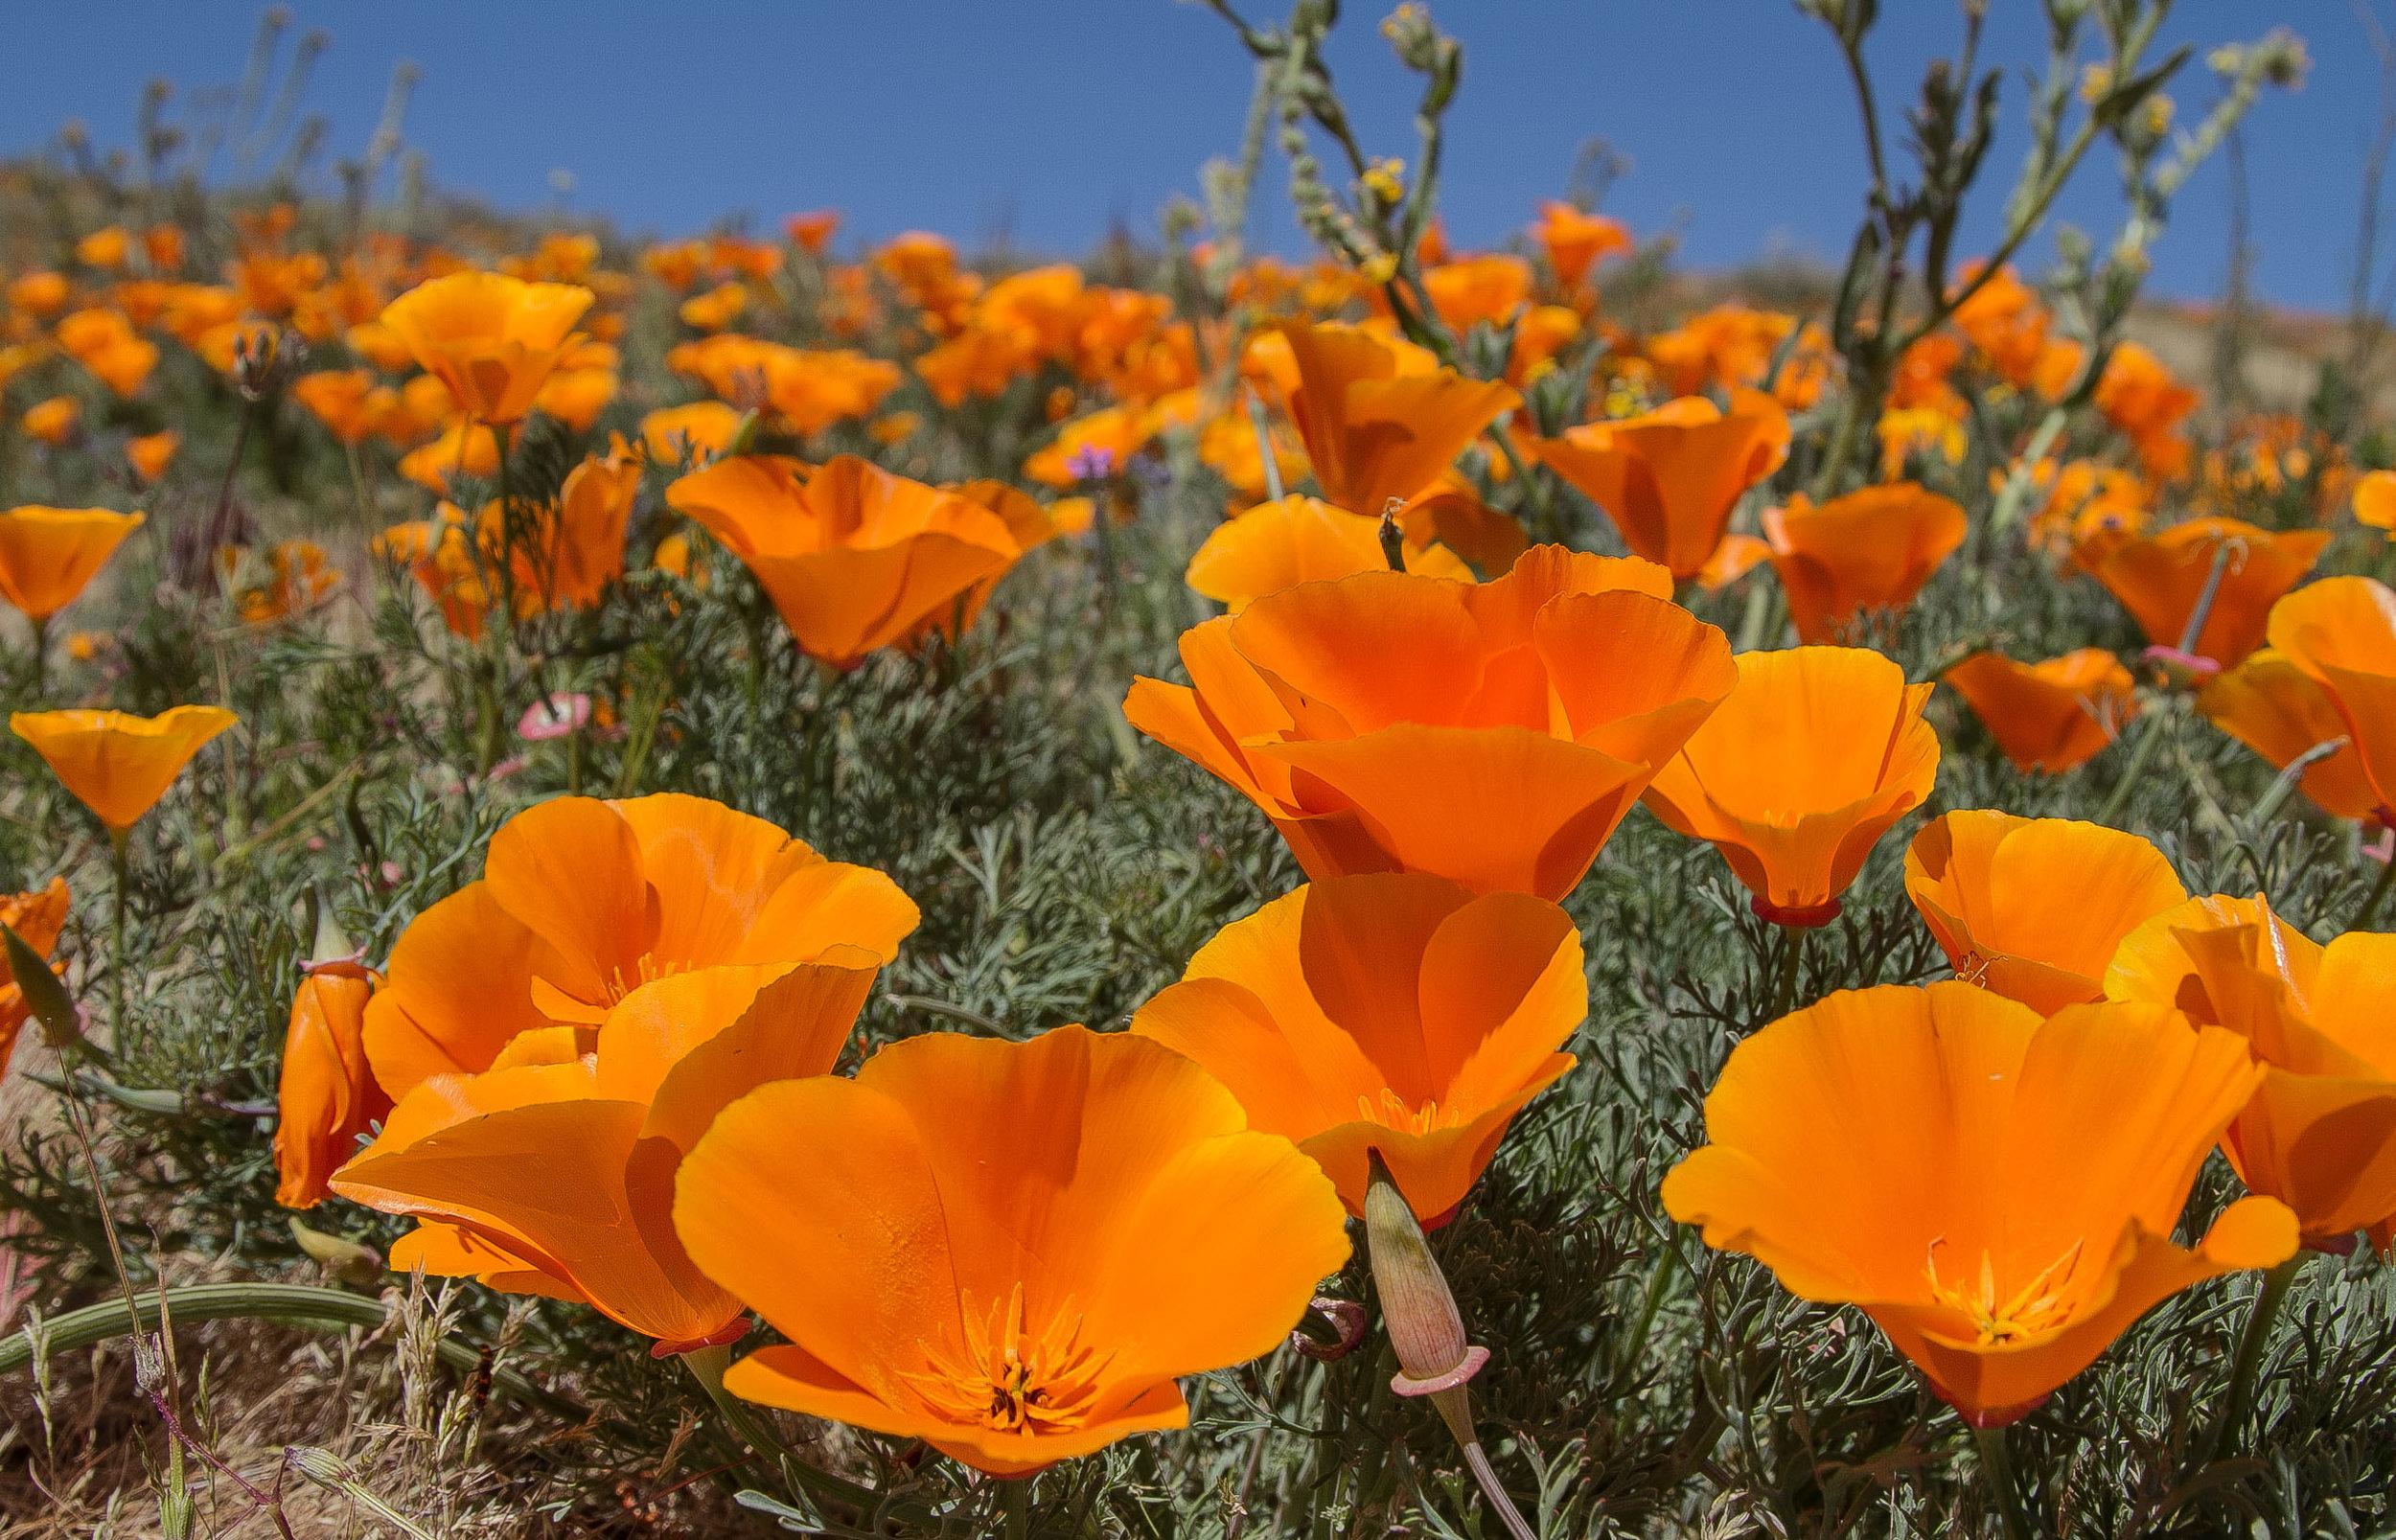  The recent rain has brought back the seasonal Poppy bloom at the Antelope Valley Poppy Reserve in Antelope Valley California on April 8, 2017. 